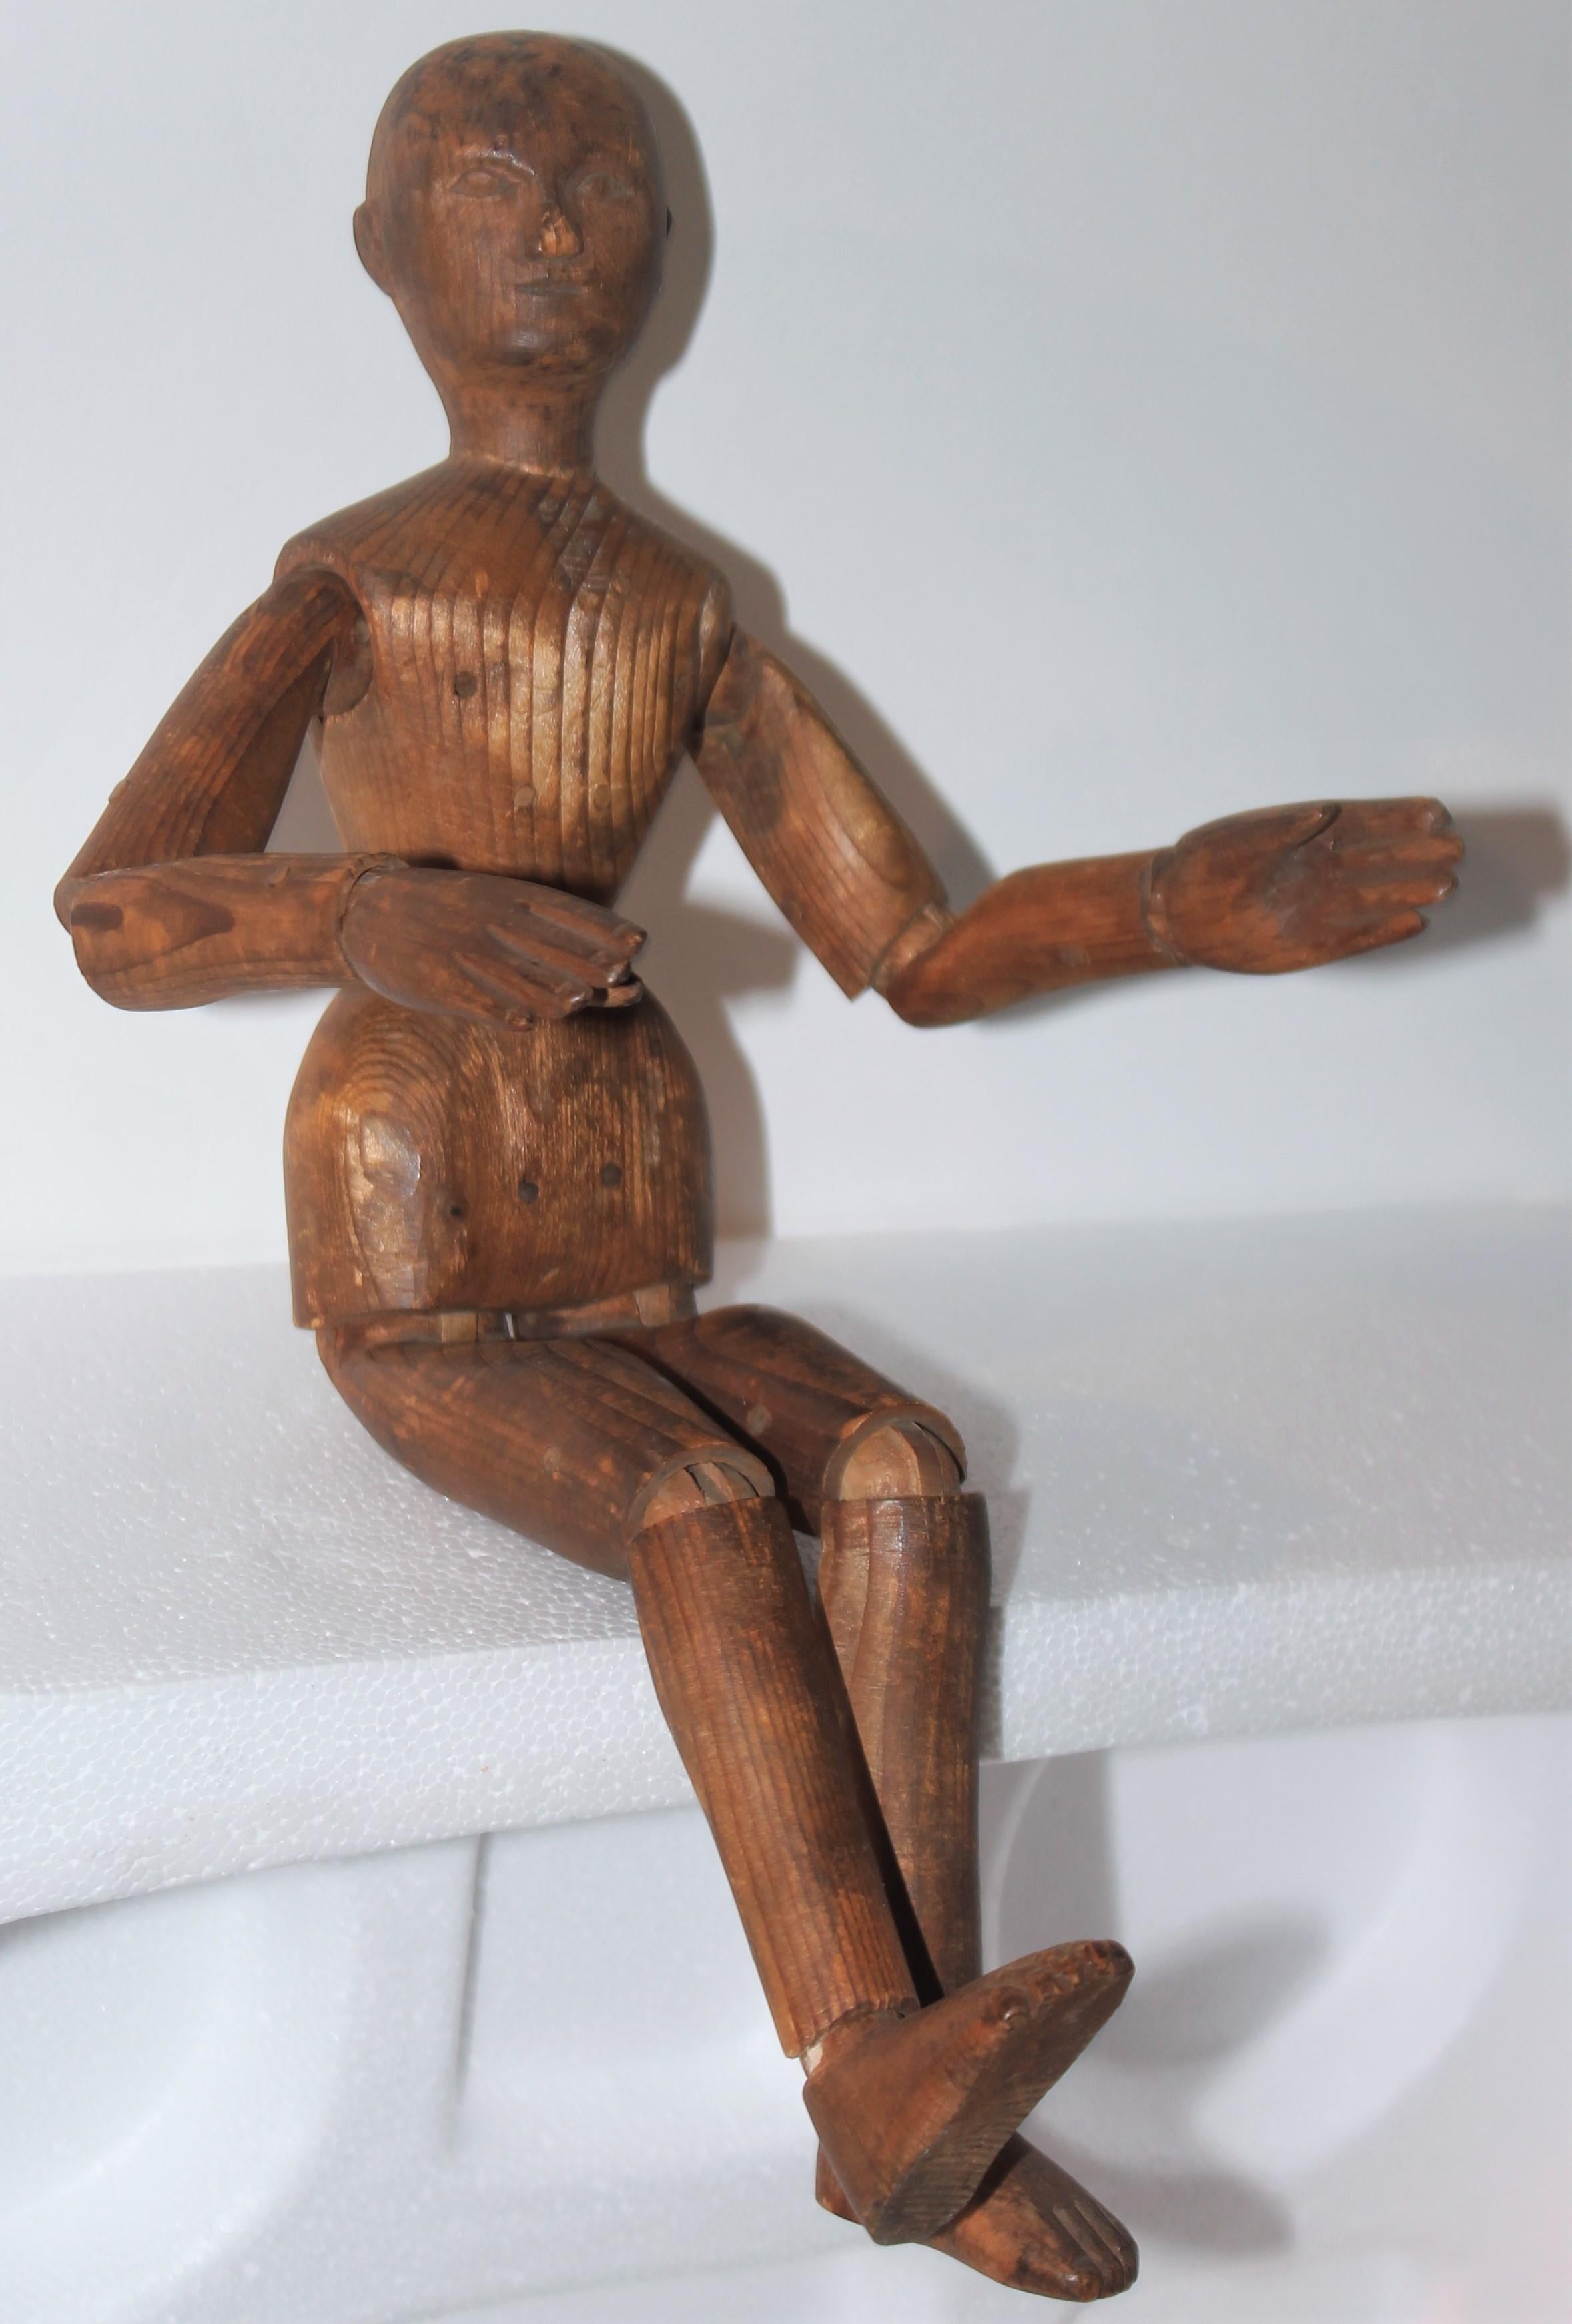 This fantastic hand carved wood articulated mannequin is very early 19thc and is all wood pegged. The condition is very good with a fine patina. This hand carved sculpture has a fine patina and slight wear to the nose and hands.